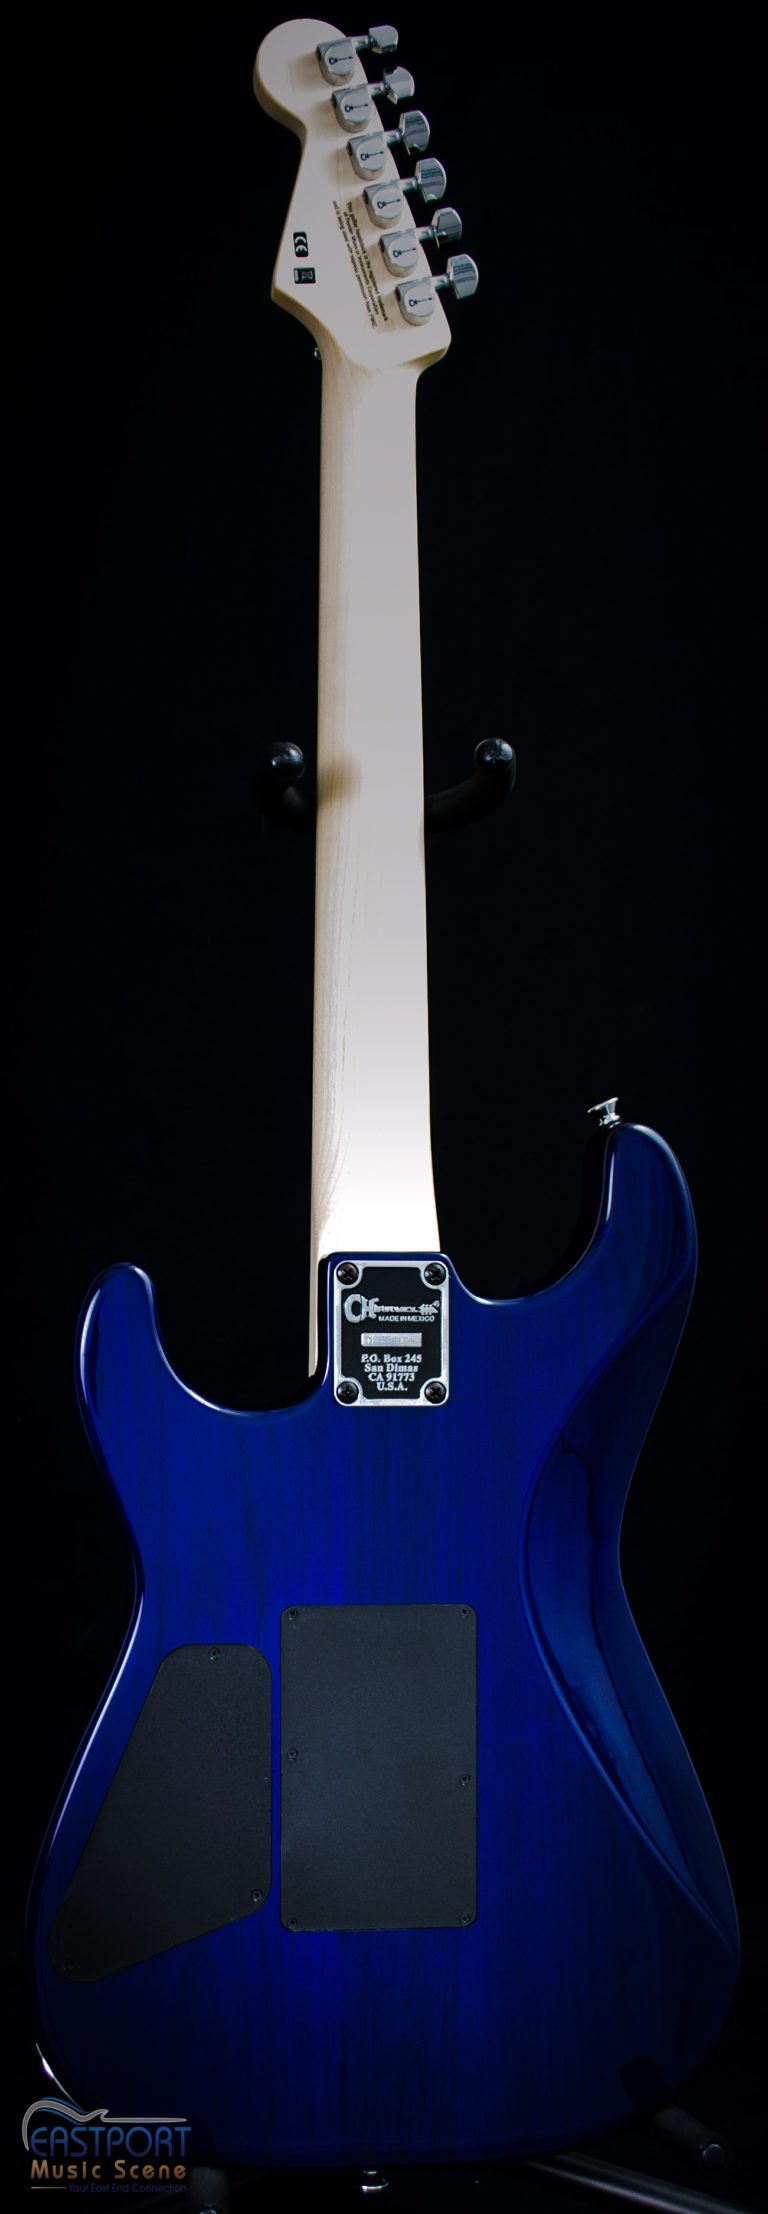 A blue electric guitar with white strings and black headstock.